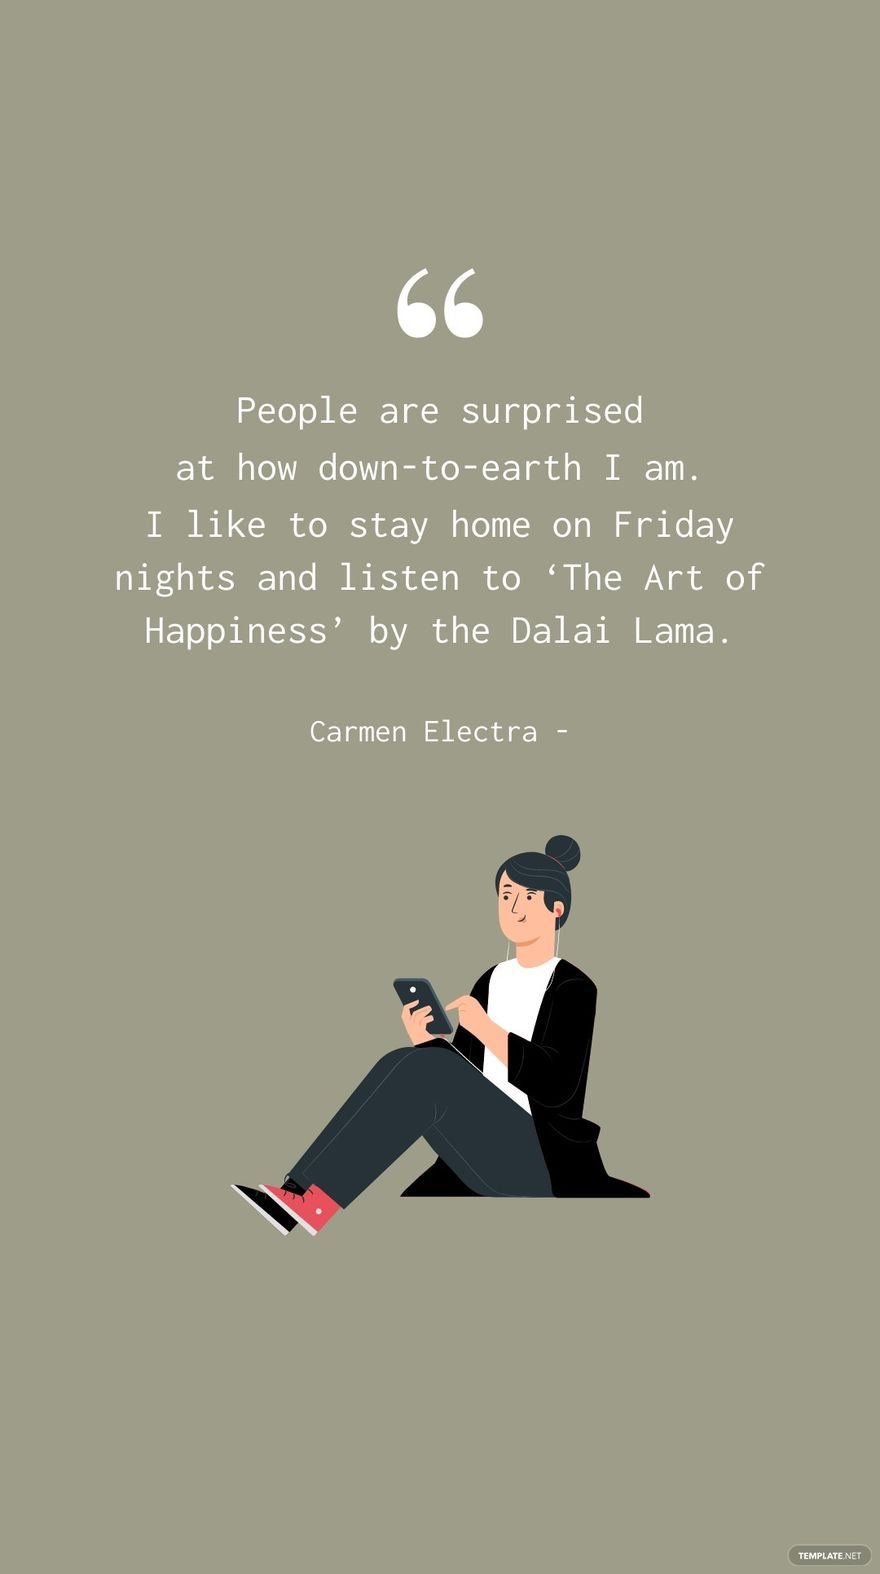 Free Carmen Electra - People are surprised at how down-to-earth I am. I like to stay home on Friday nights and listen to ‘The Art of Happiness’ by the Dalai Lama.